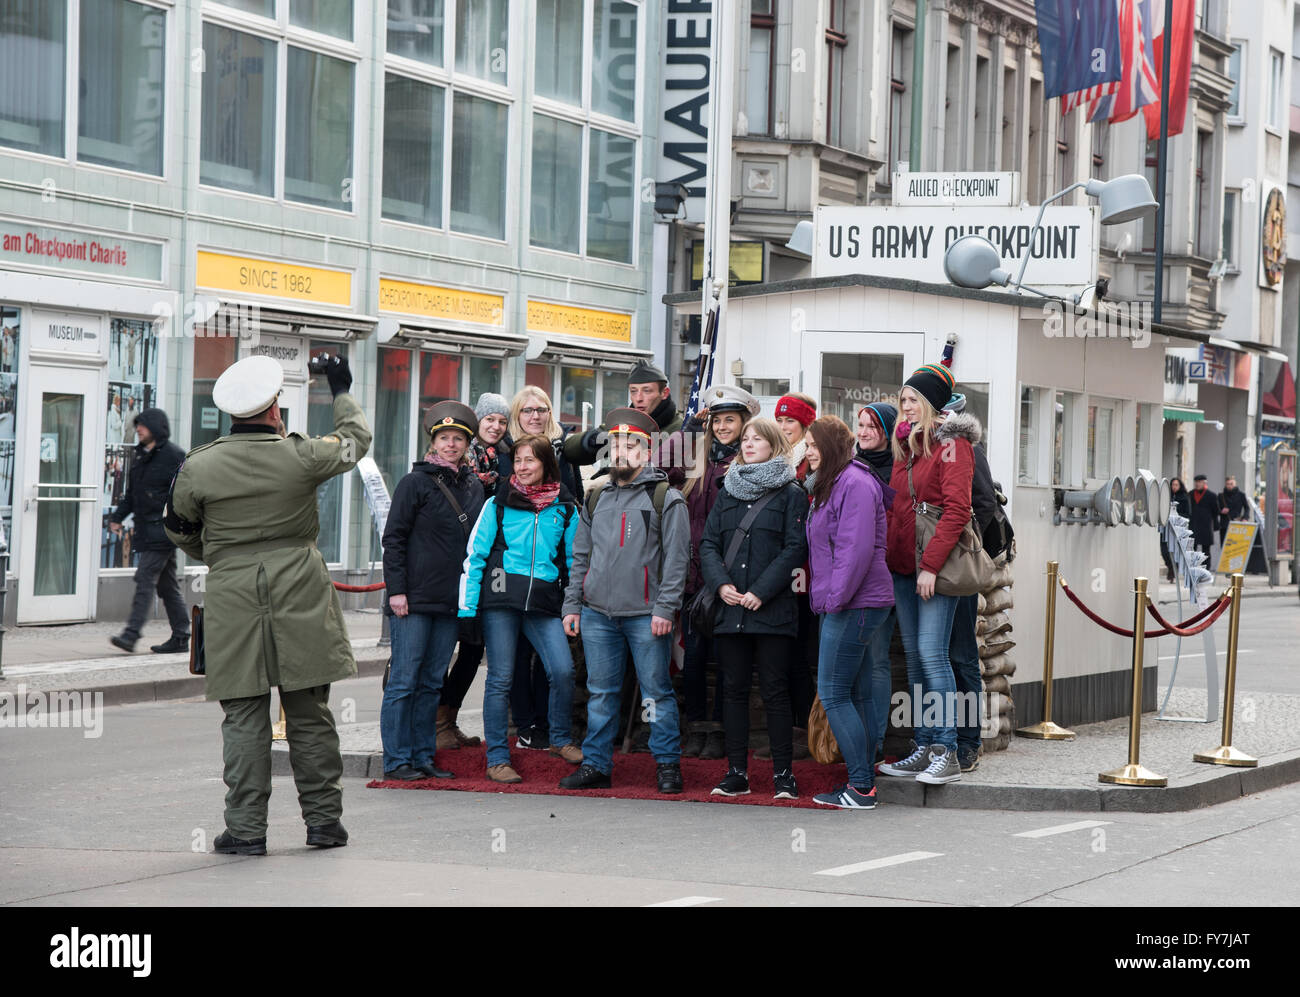 Group of  Tourists taking photos with guards at famous Checkpoint Charlie crossing point bet Stock Photo